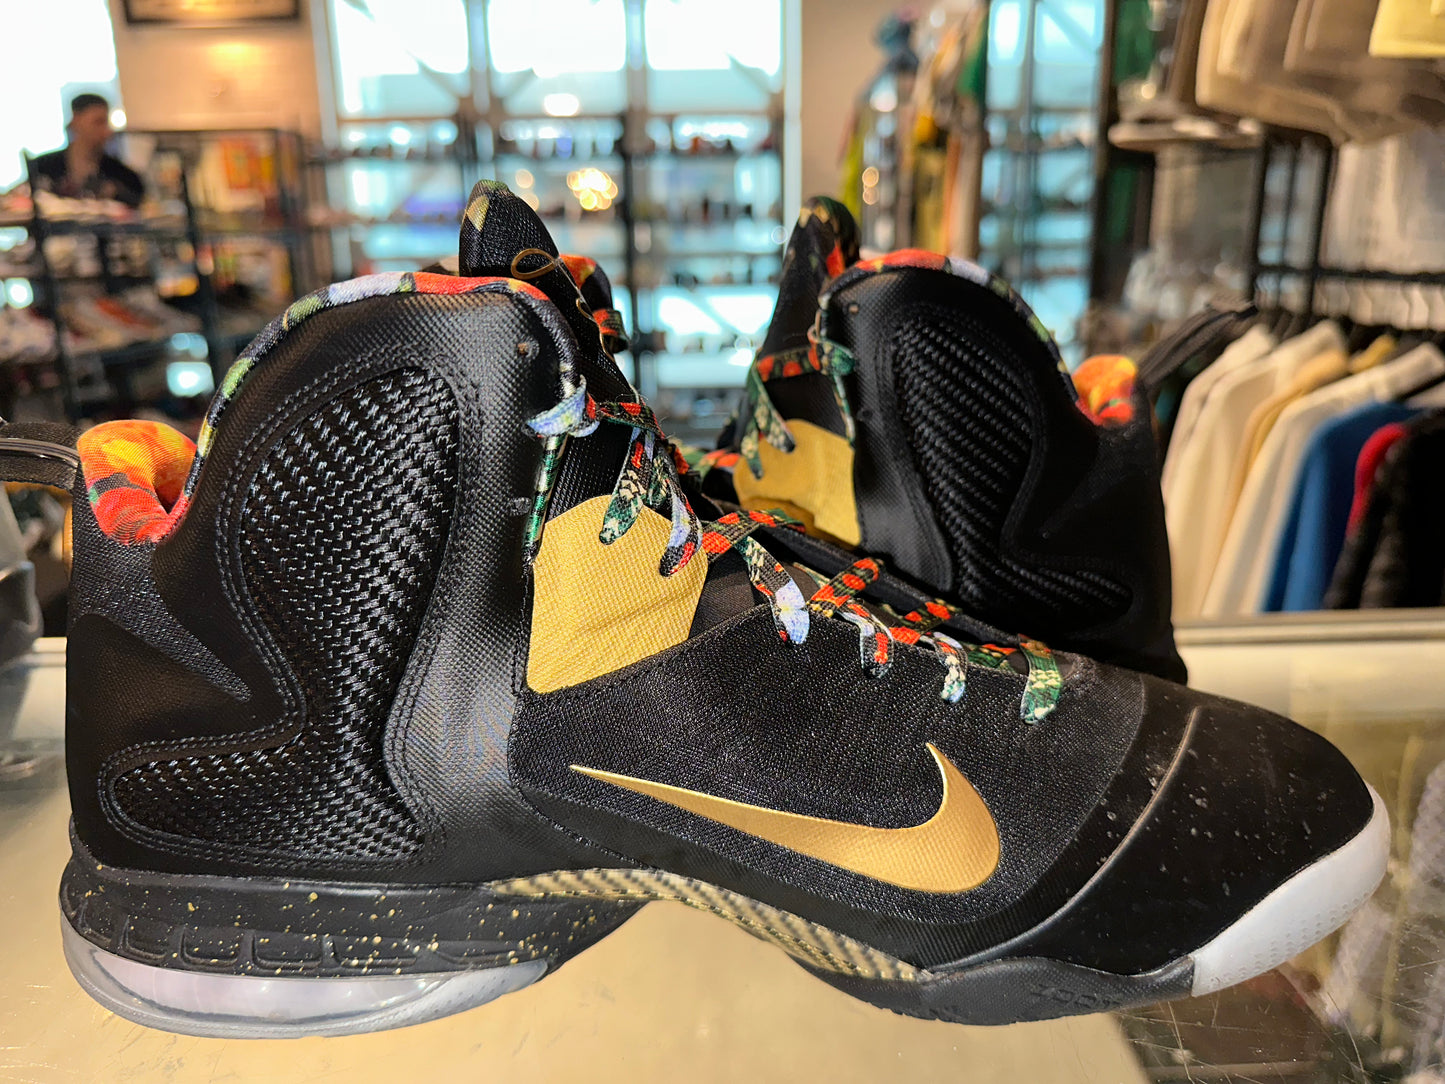 Size 14 LeBron 9 “Watch the Throne” (Mall)